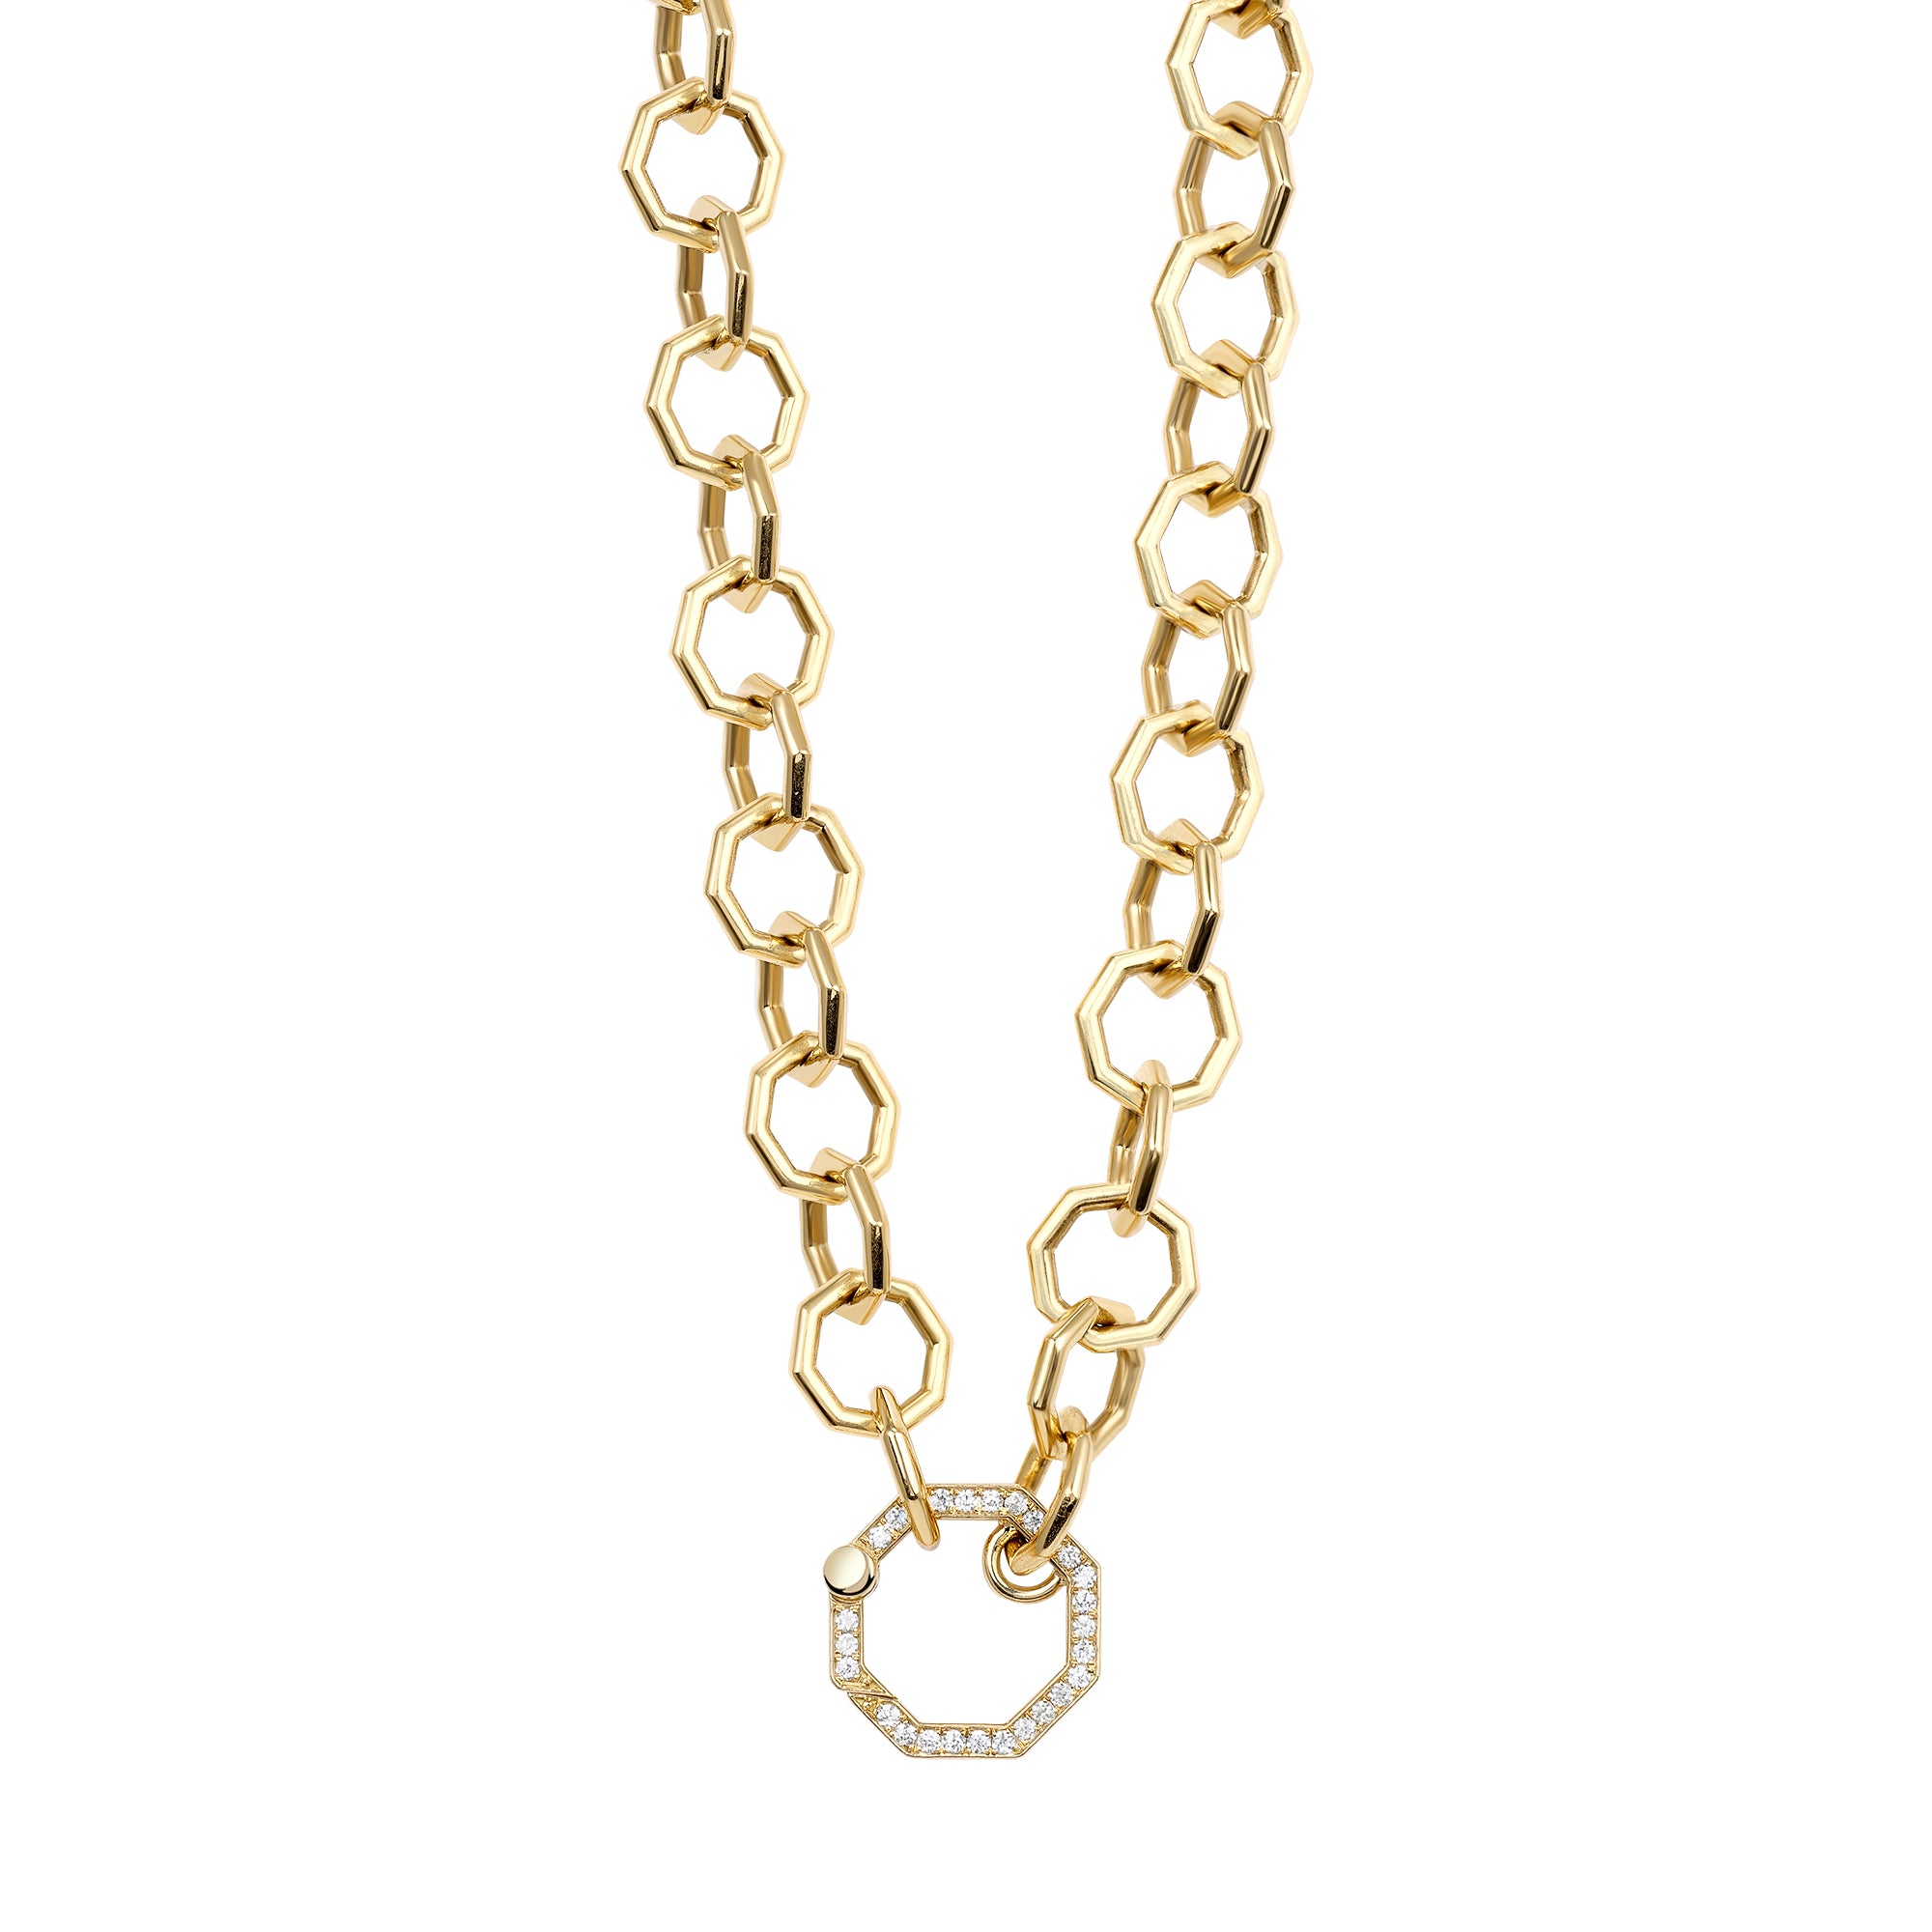 SINGLE STONE ELENA featuring Approximately 0.25ctw G-H/VS old European cut diamonds prong set on a handcrafted 18K yellow gold octagonal link necklace. Necklace measures 17".